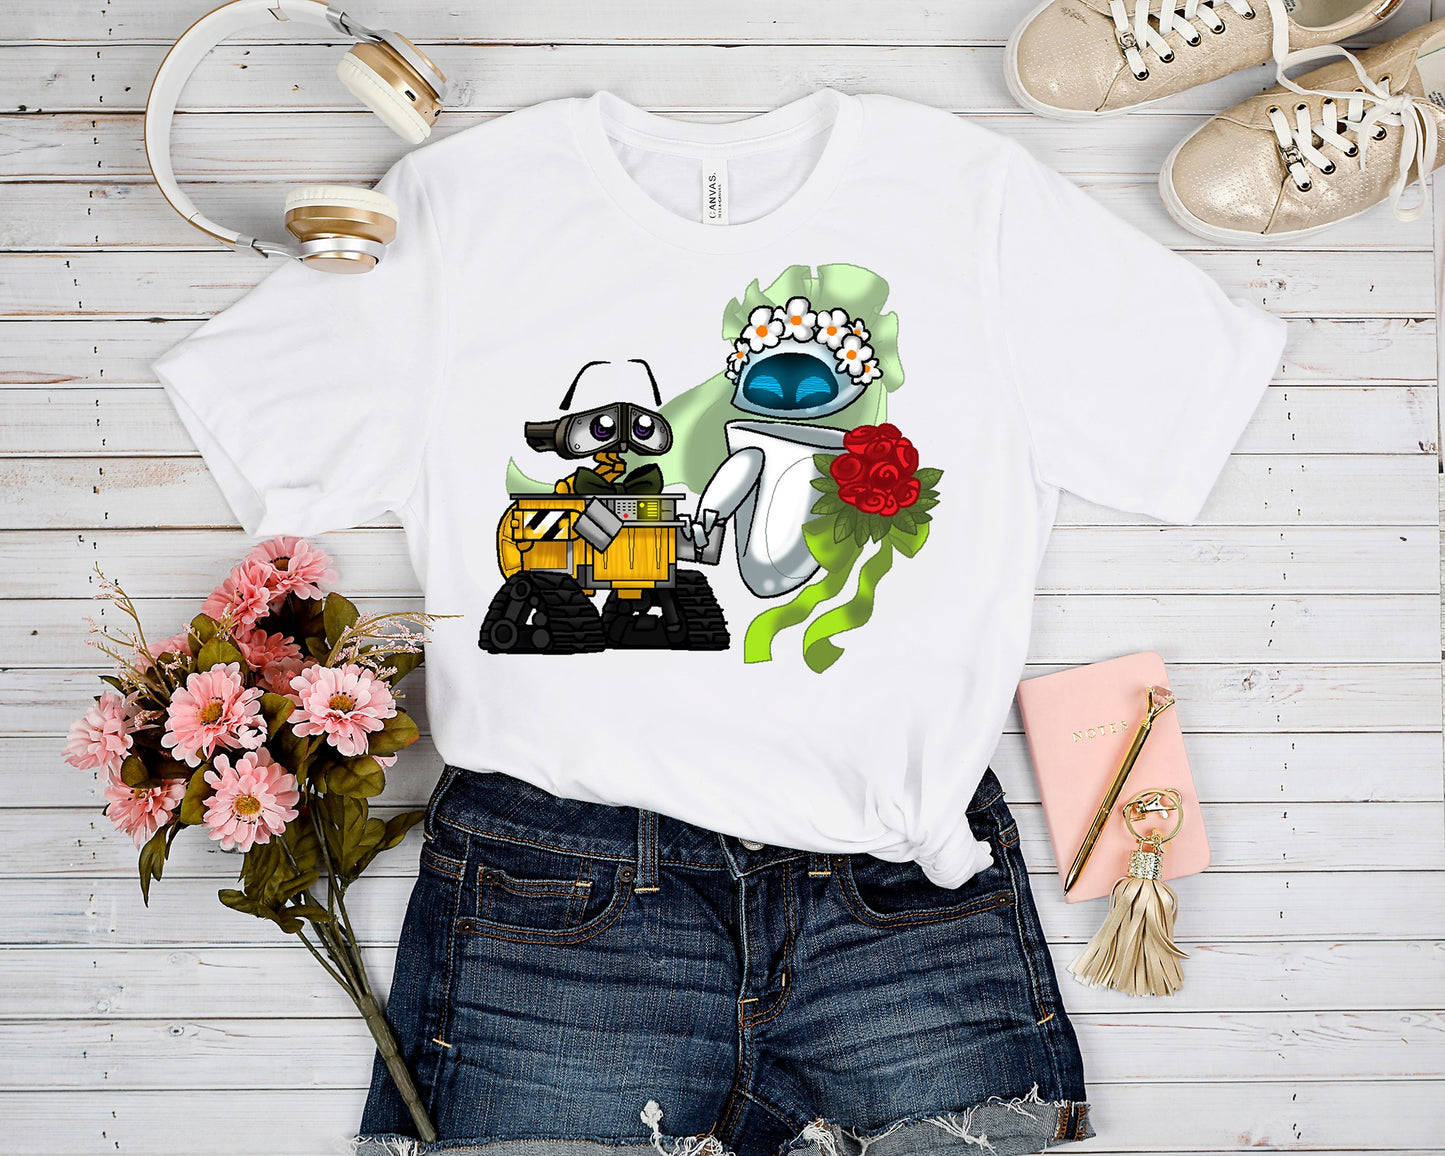 OUTFIT 6-ROBOT LOVERS TEE